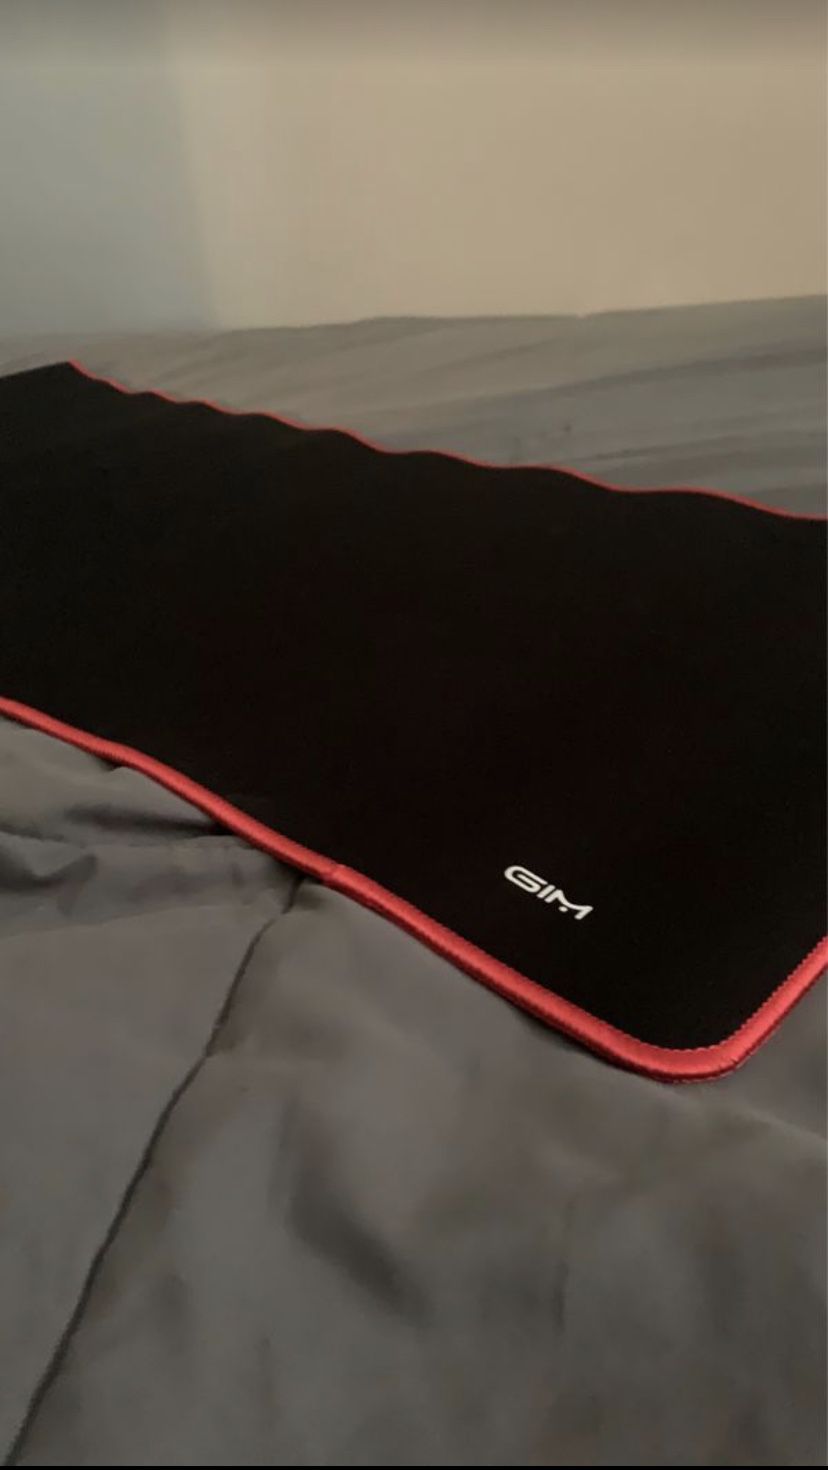 GAMING MOUSE PAD